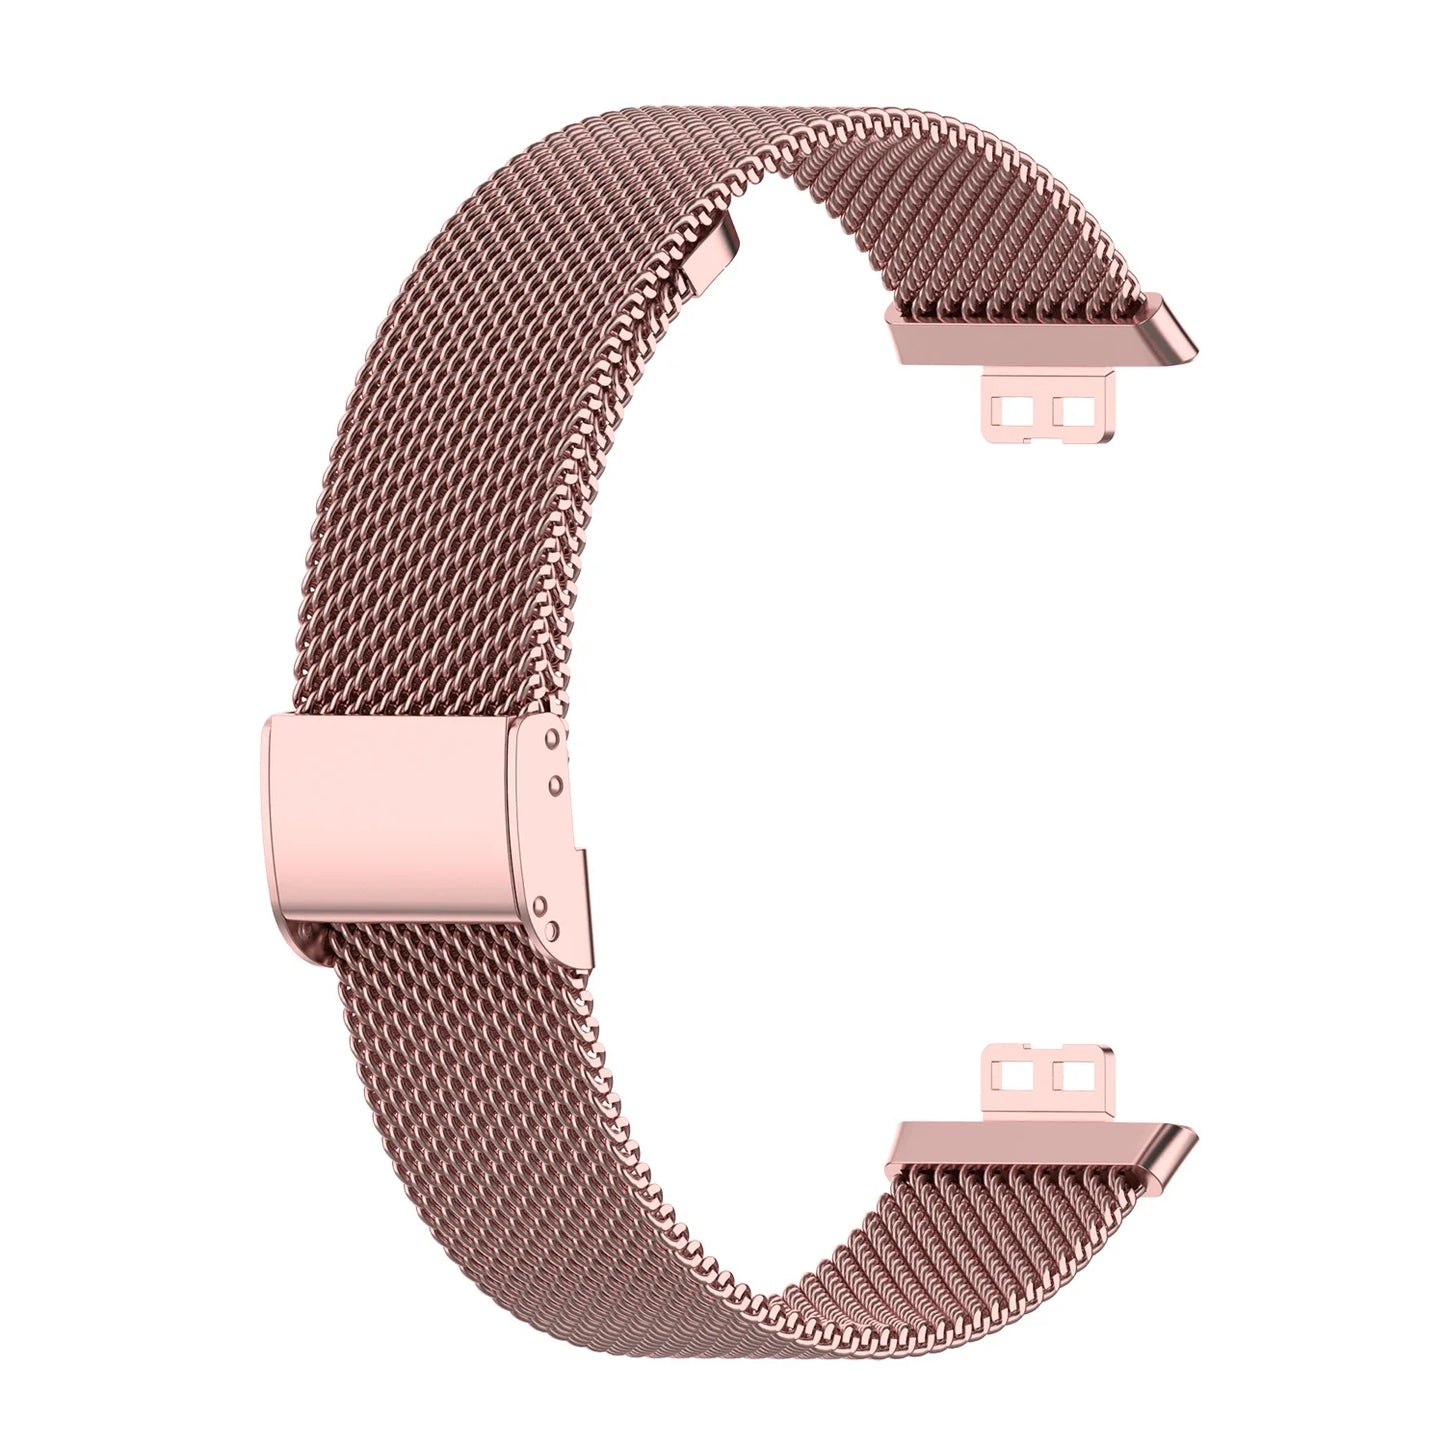 Magnetic band For Huawei Watch fit strap Accessories belt Loop stainless steel metal bracelet correa Huawei Watch fit new band